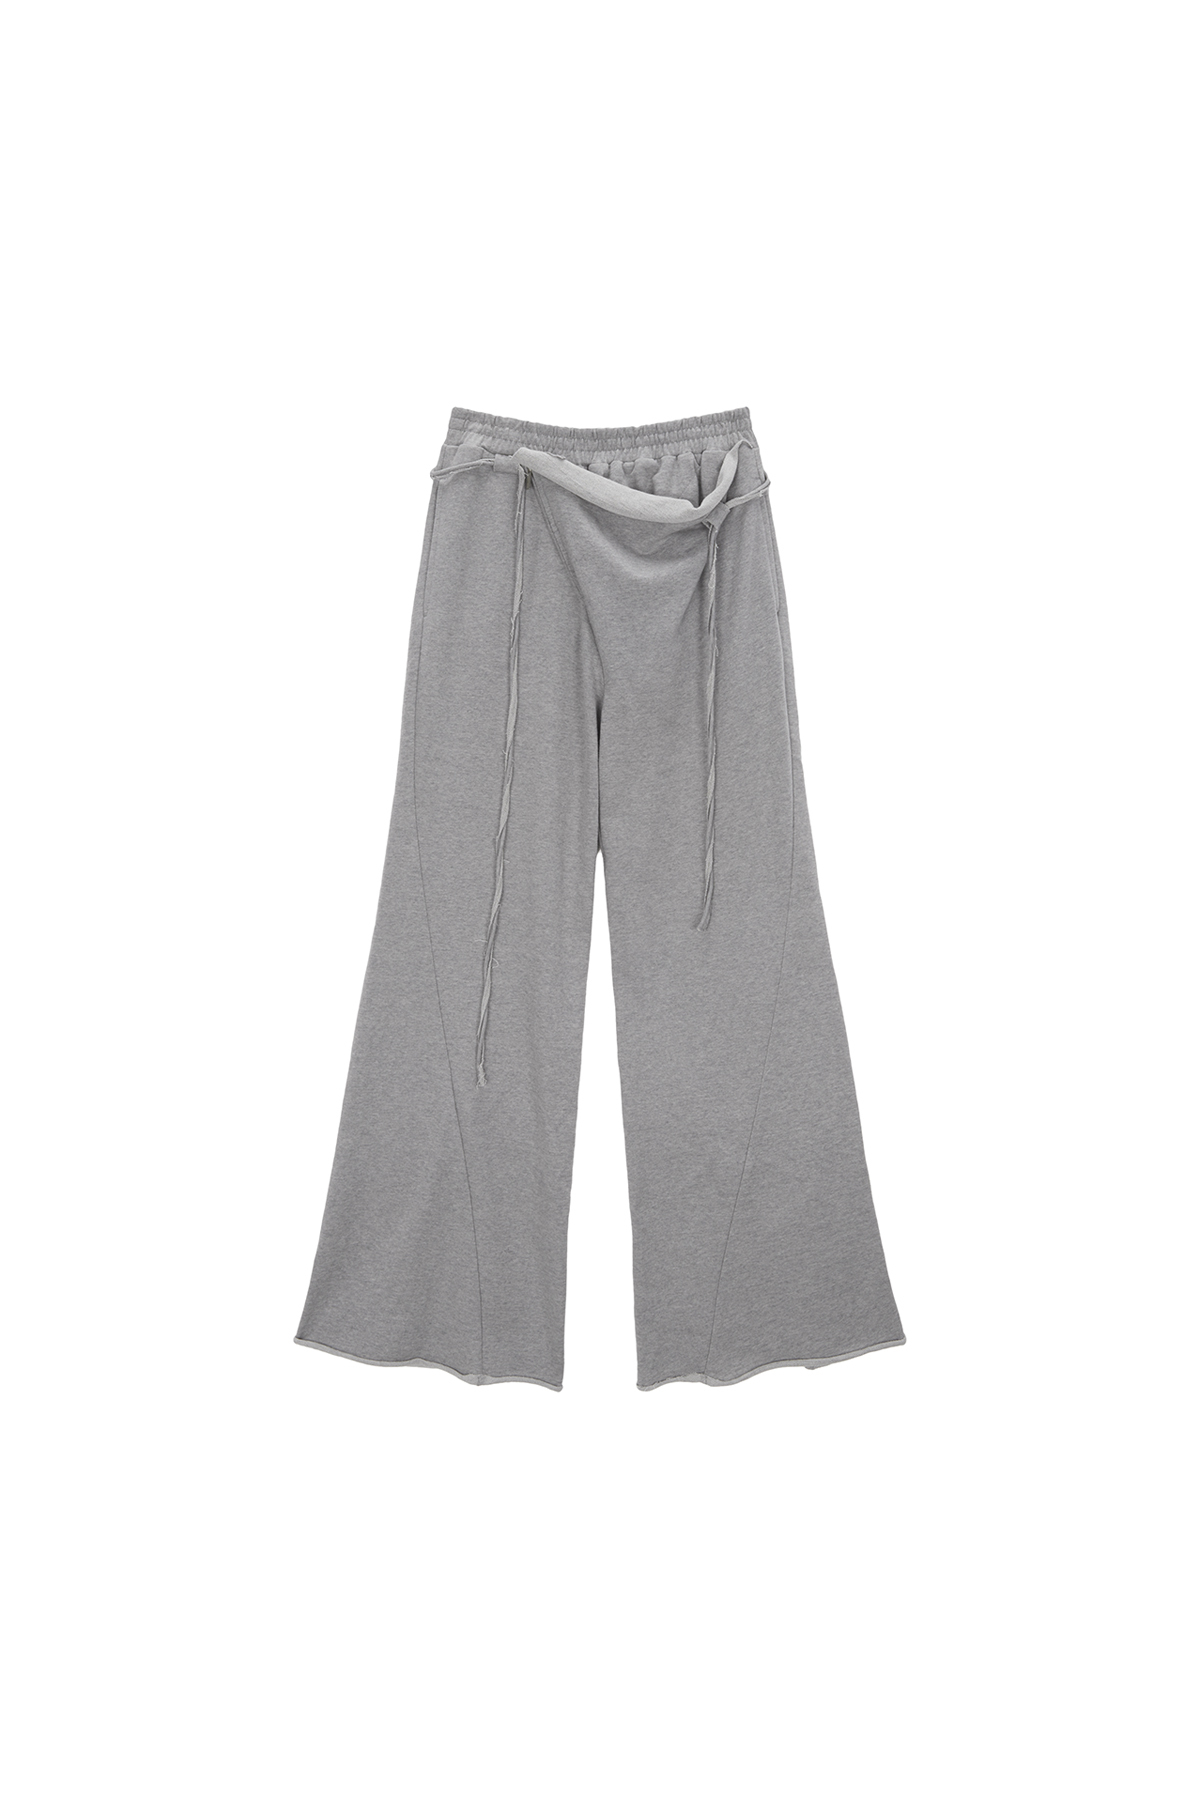 WRAP POINT STRING SWEATPANTS IN GREY